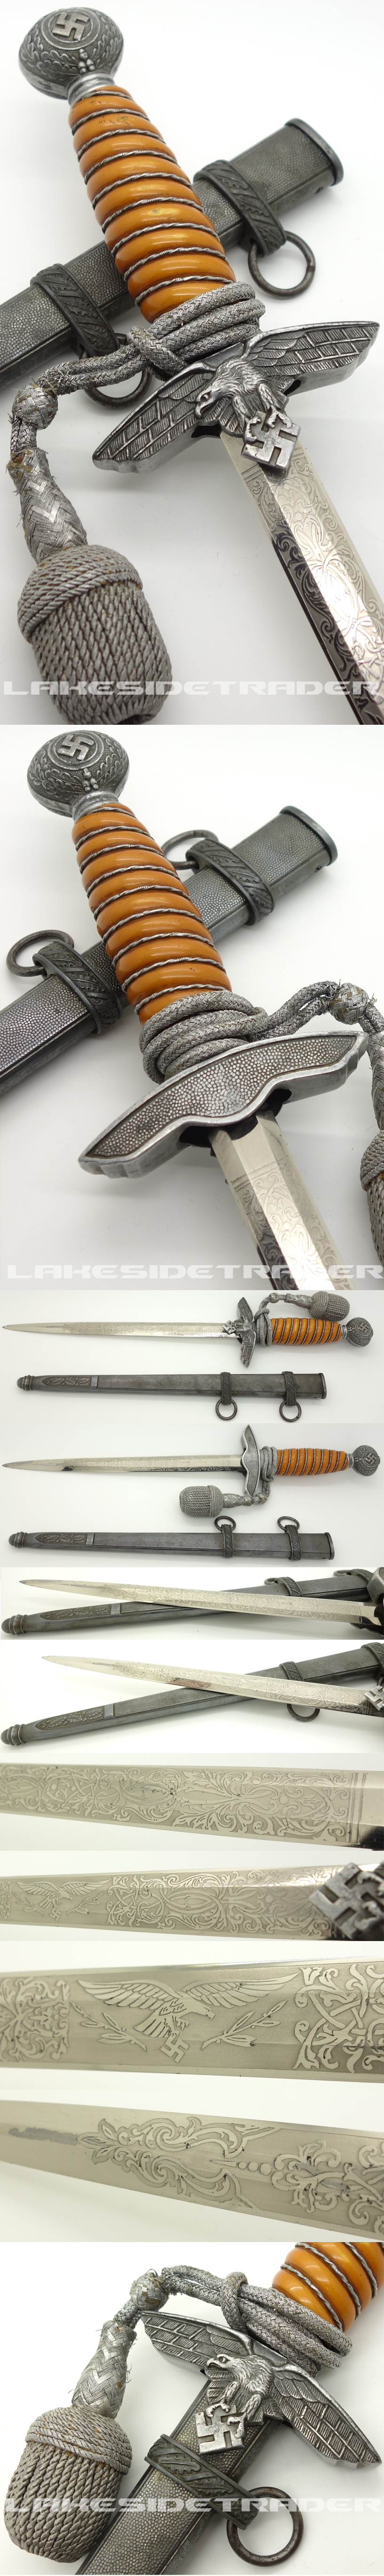 Etched Unmarked 2nd Model Luftwaffe Dagger by Voos